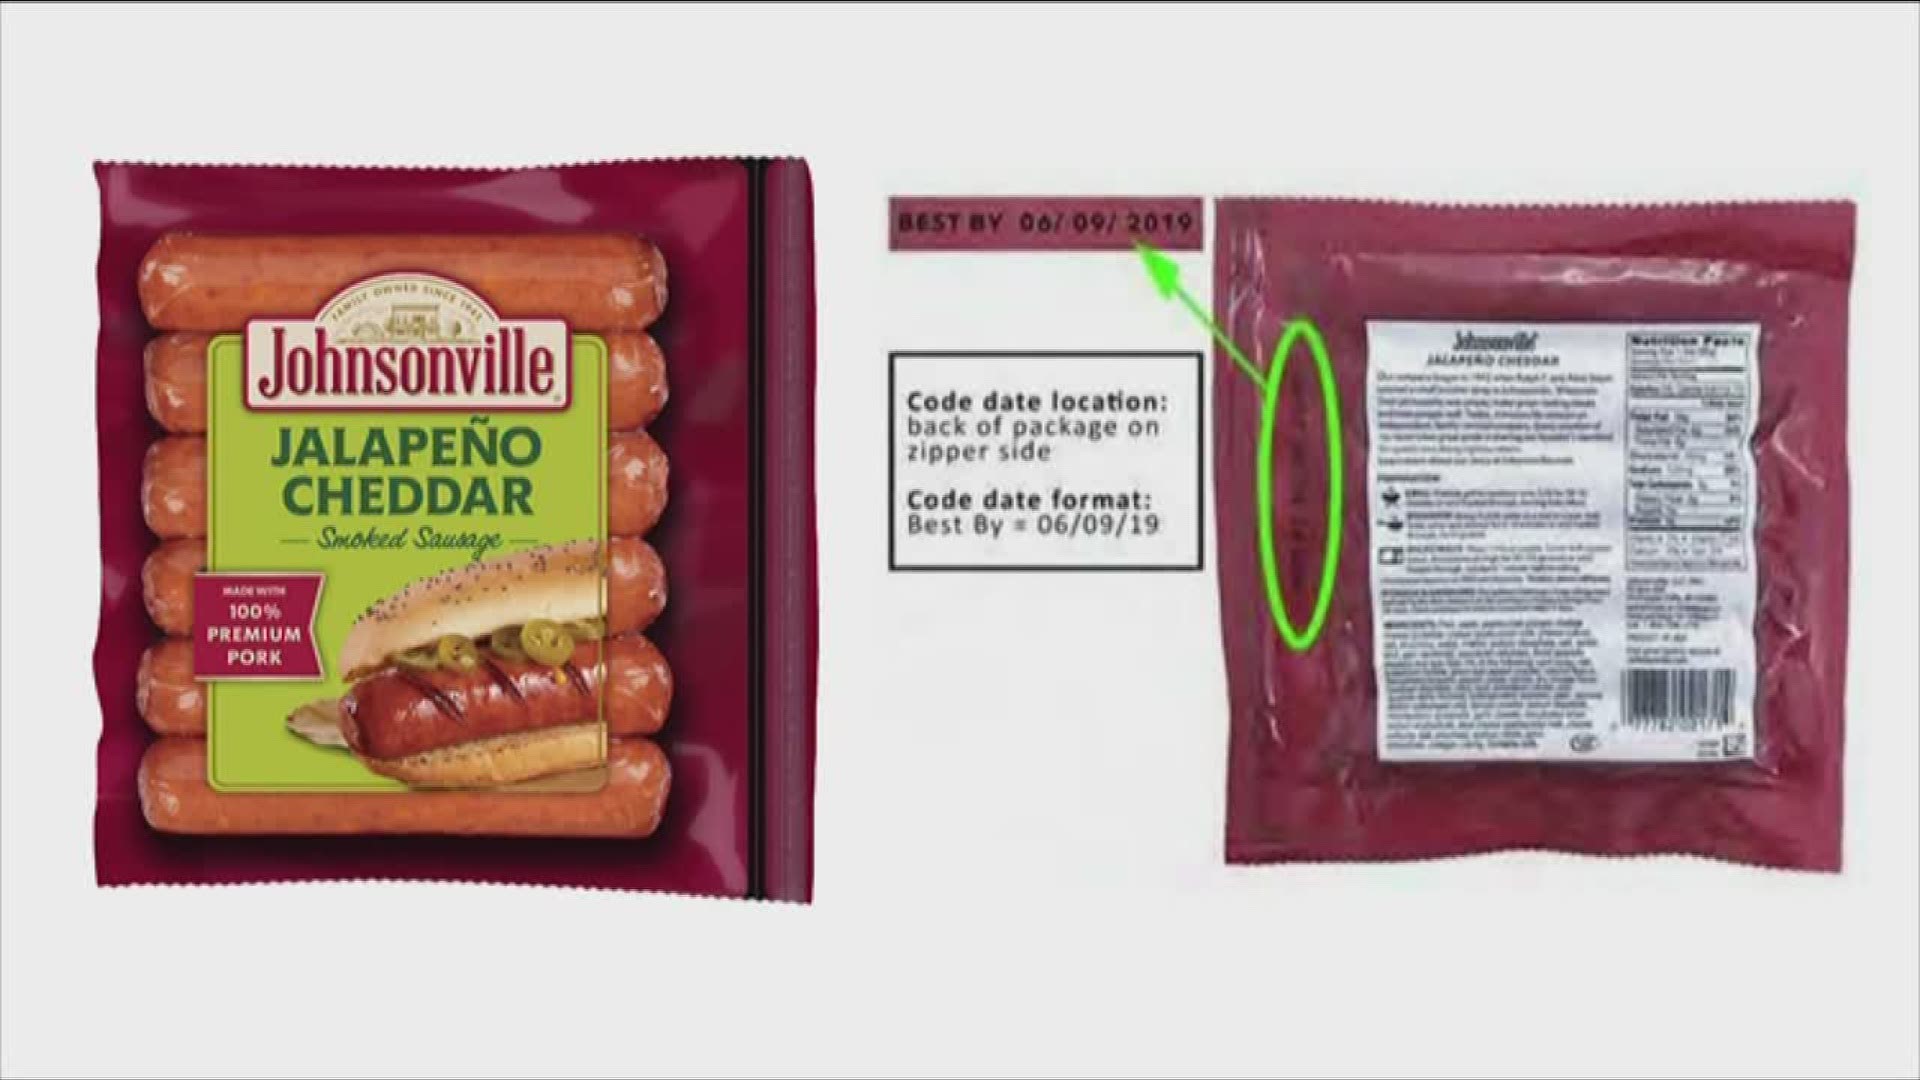 The foods may contain pieces of hard plastic, the distributor warns.